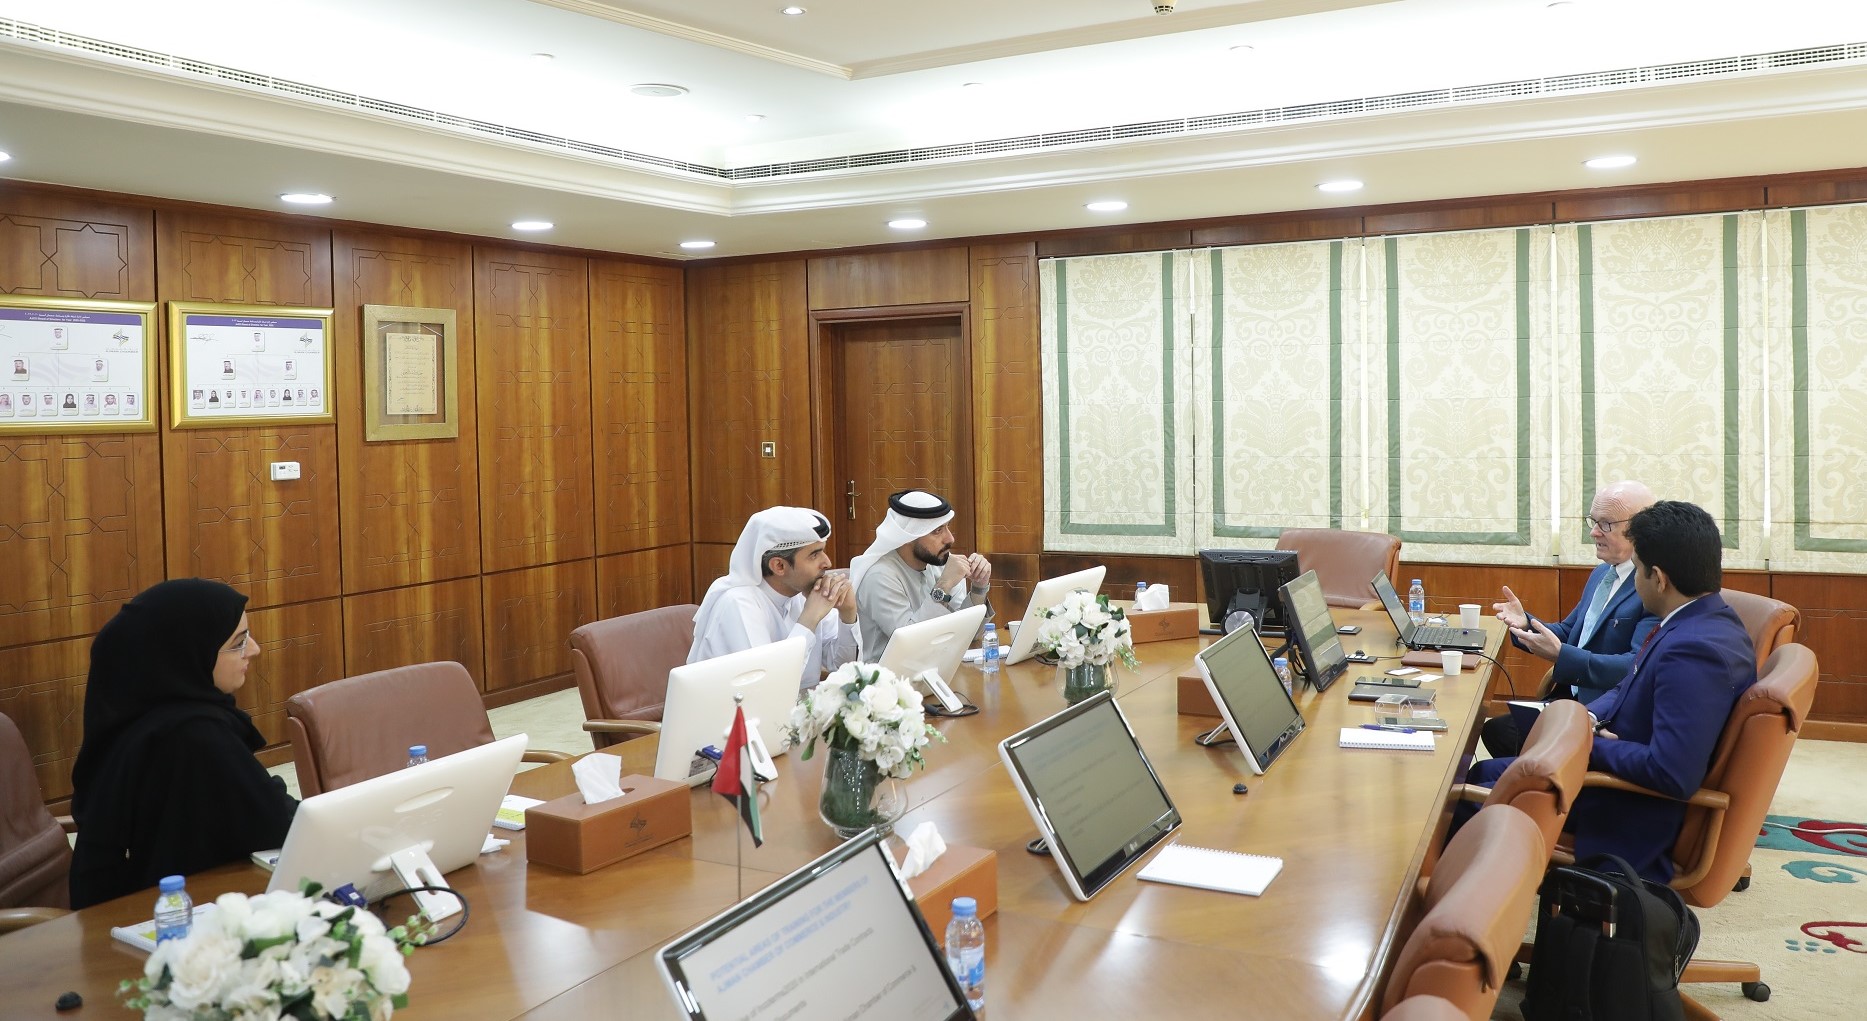 Ajman Chamber is looking to strengthen its local and international participation with ICC UAE